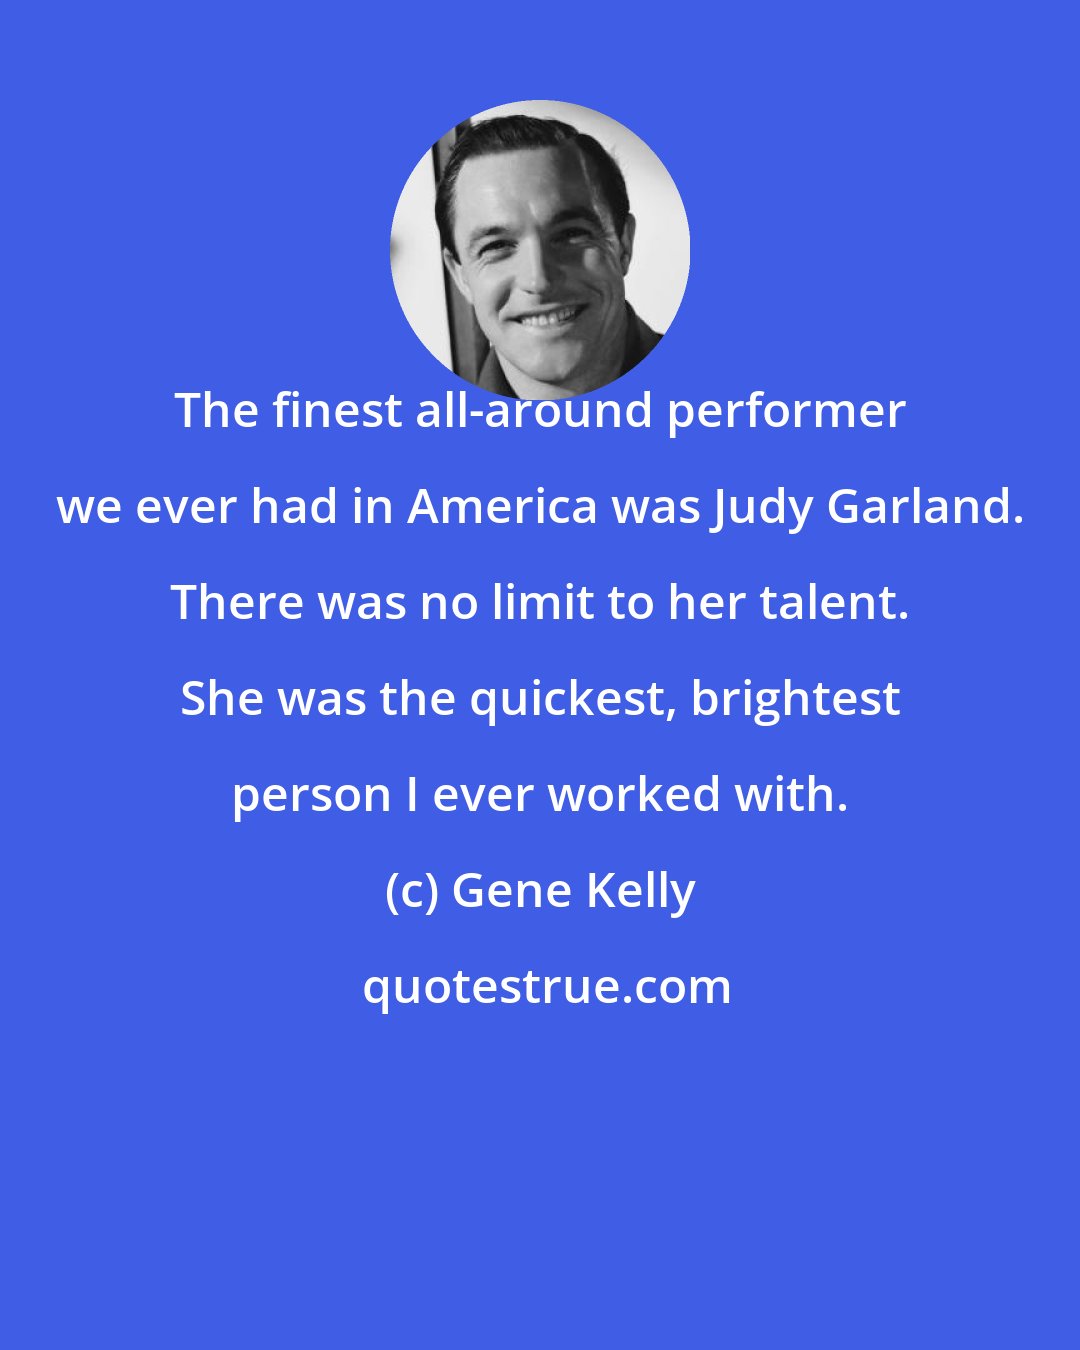 Gene Kelly: The finest all-around performer we ever had in America was Judy Garland. There was no limit to her talent. She was the quickest, brightest person I ever worked with.